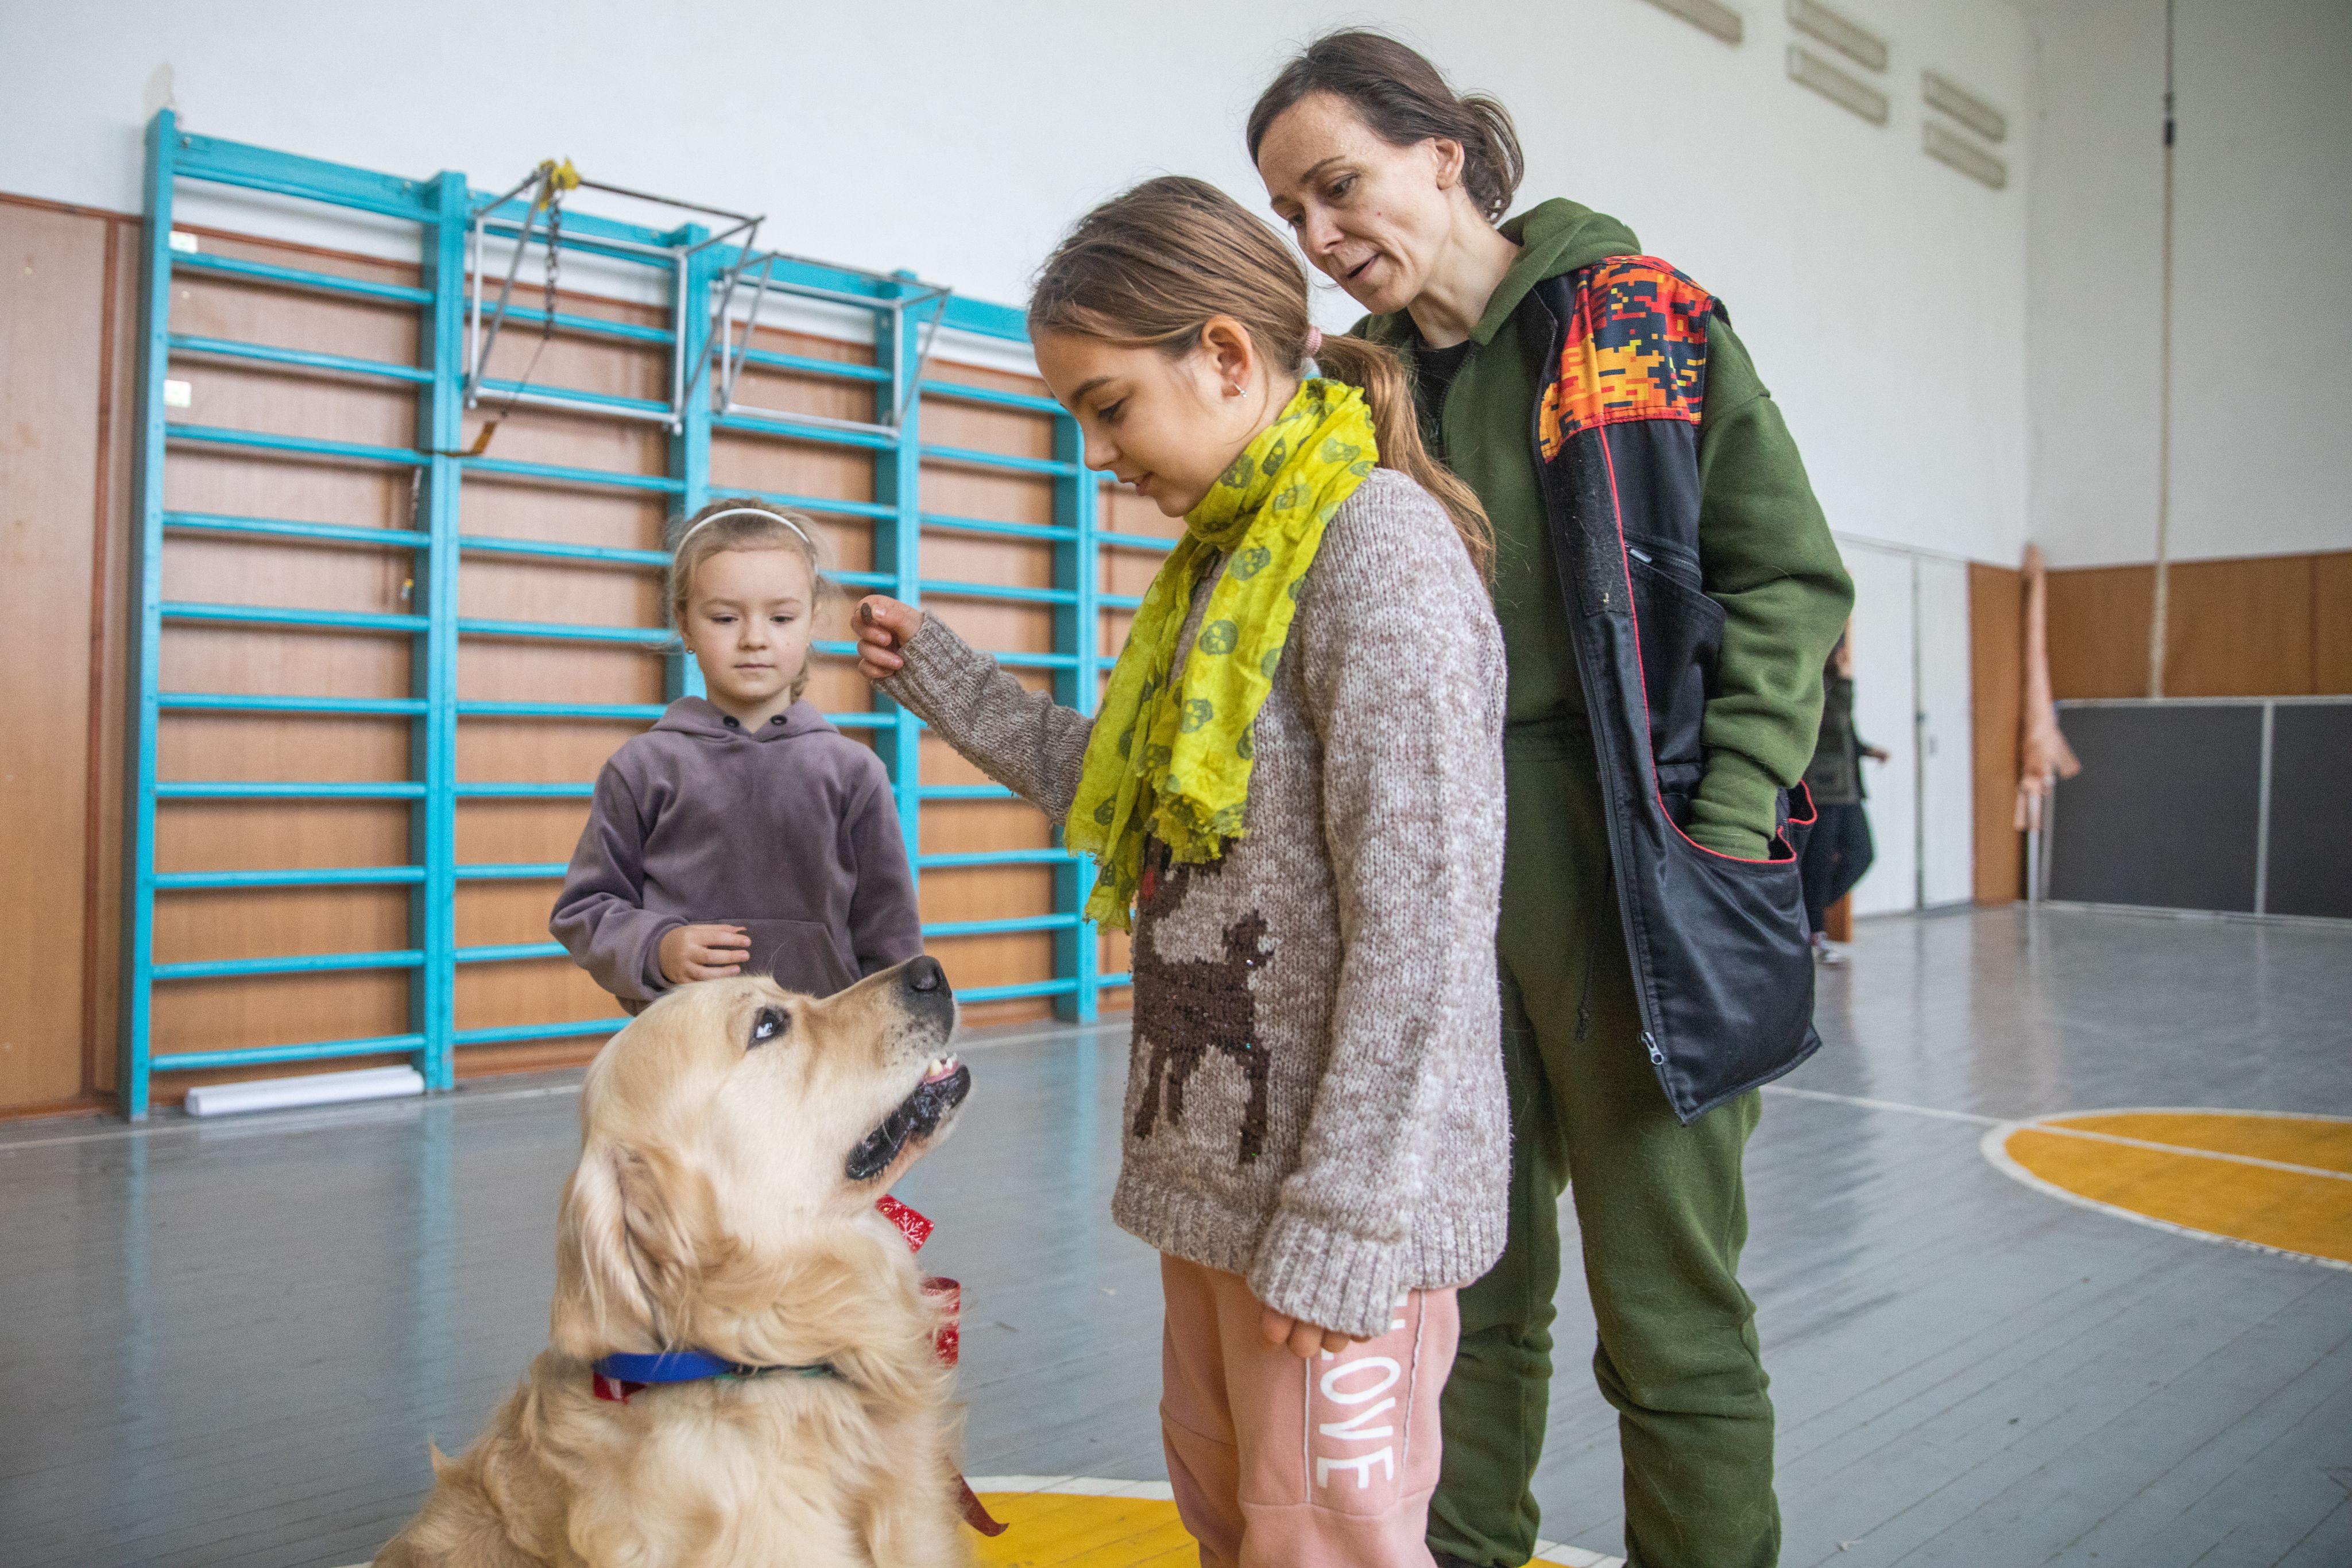 Viktoriya*, 9, and Iryna*, 7, play with therapy dog Parker at a school outside of Kyiv, Ukraine.